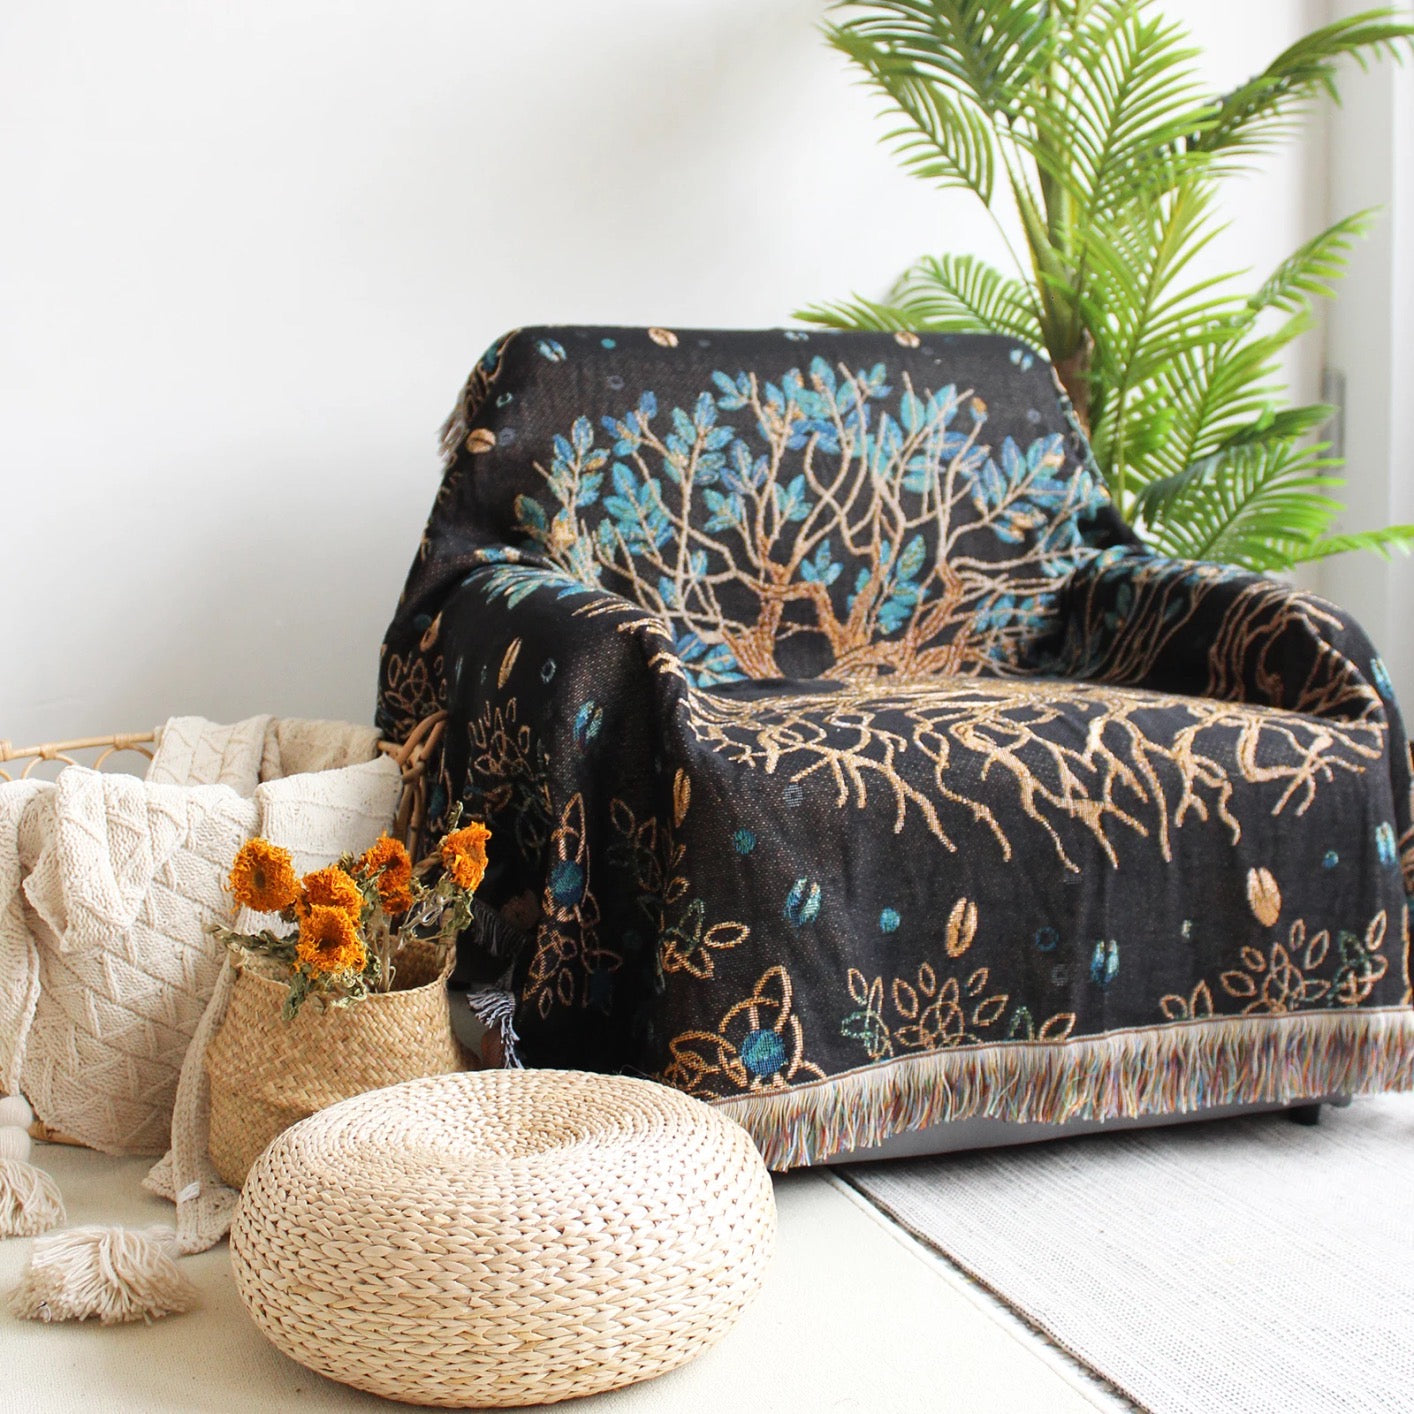 Tree Tarot pattern Woven Boho Quilt Colorful Bohemian Tapestries with tassels Spiritual Tapestry chair sofa cover